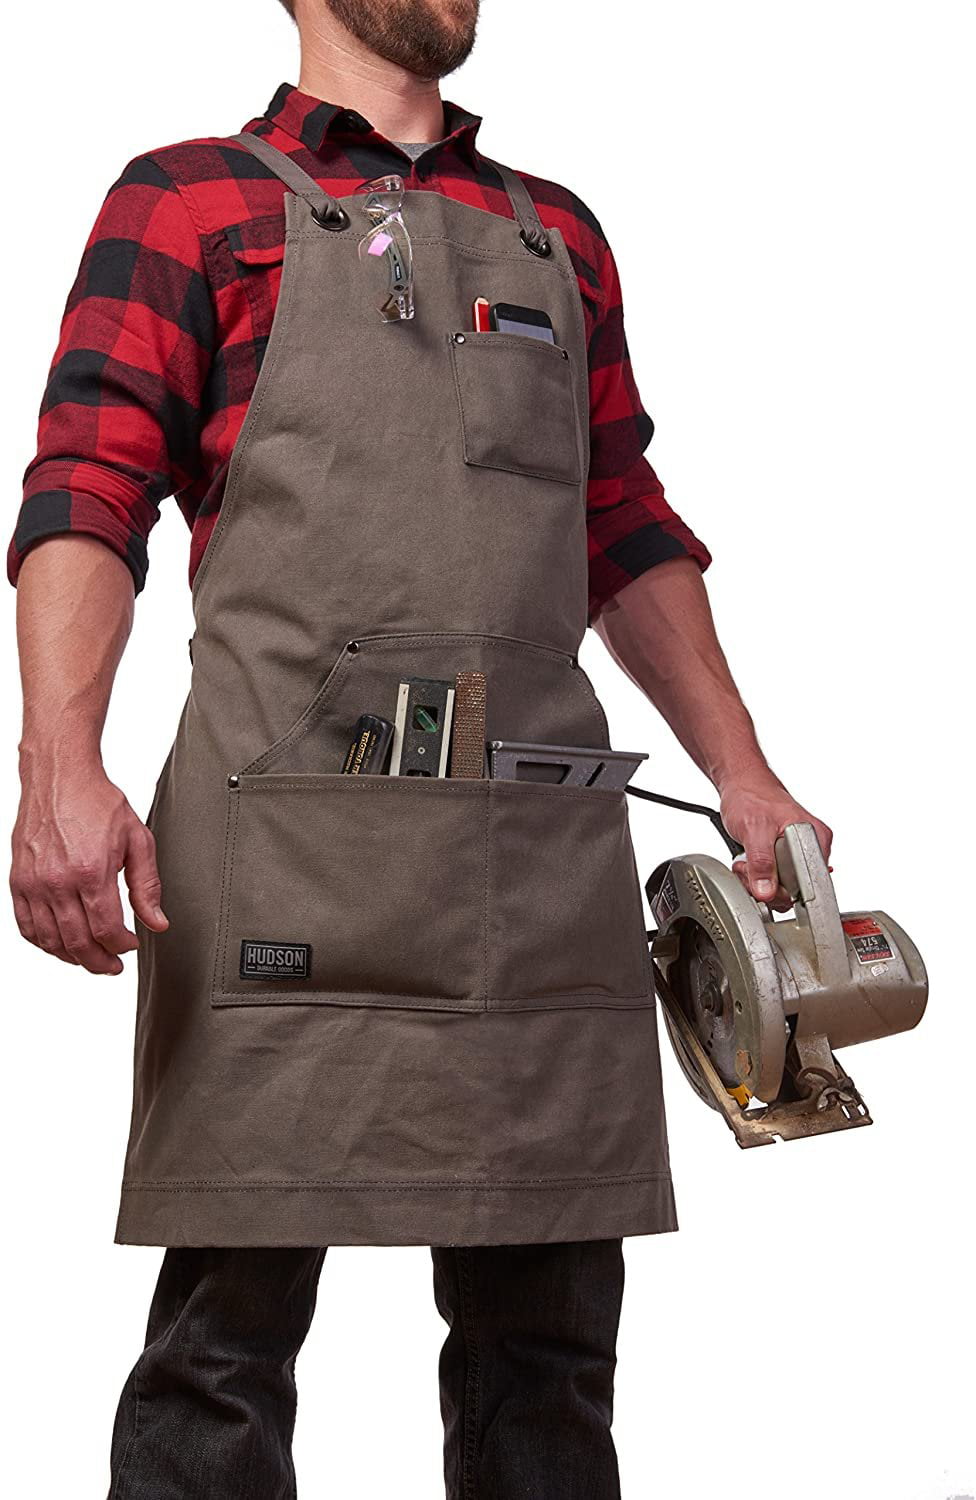 Adjustable M to XXL Housolution Work Apron Multipurpose Heavy Duty Waxed Canvas Waterproof Oil-resistant Tools Apron with Tool Pockets for Woodworking Crafting Painting etc Brown Cross-Back Straps 